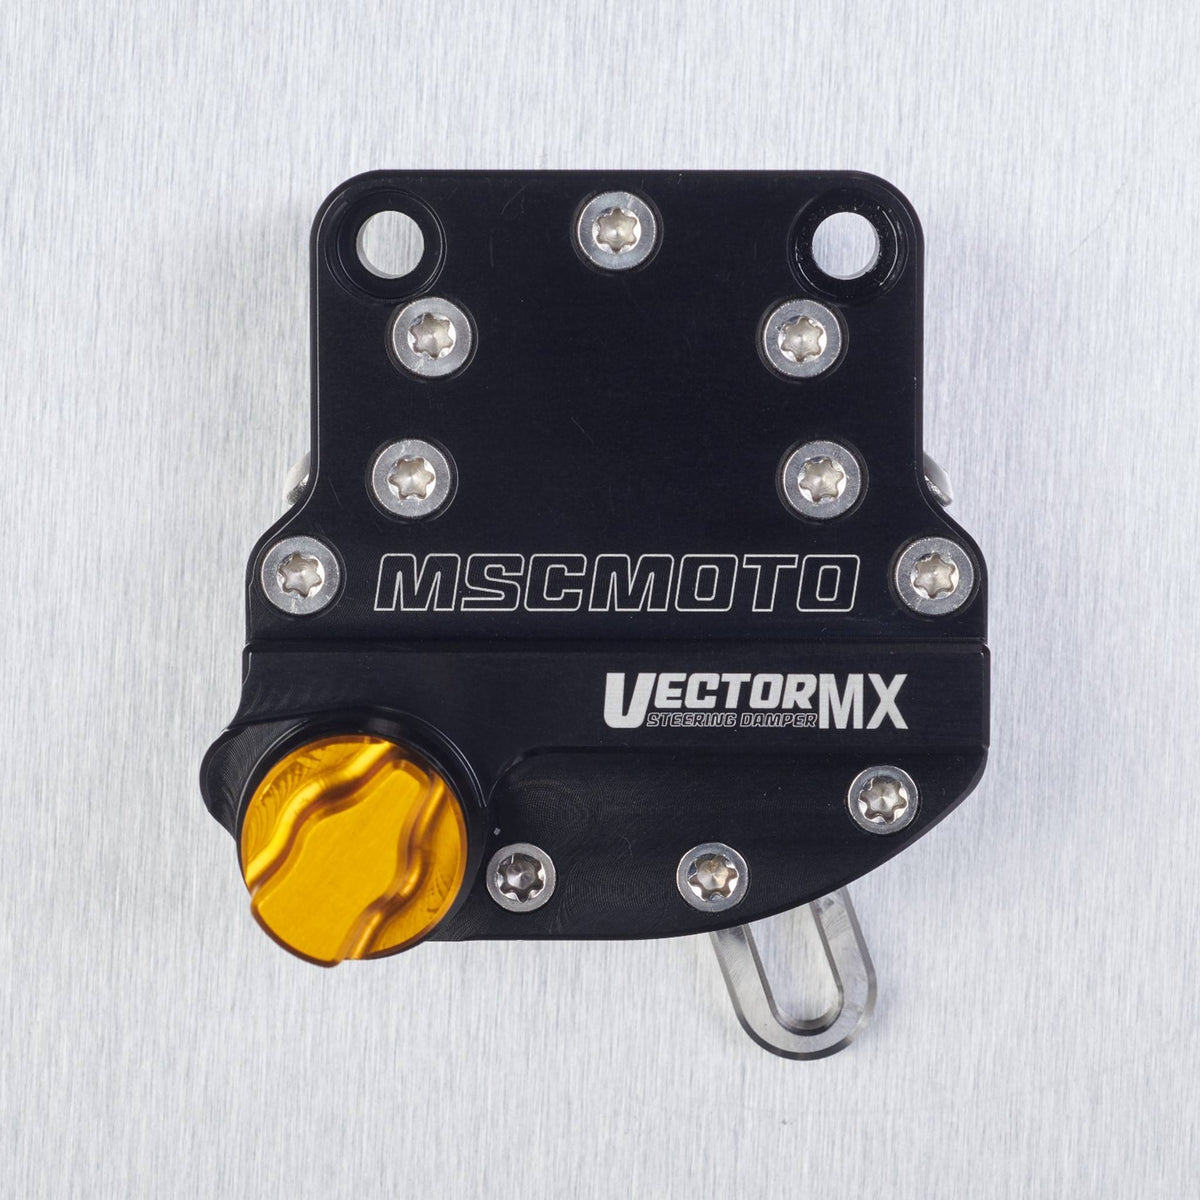 mscmotousa, VectorMX Steering Damper Kit &quot;Down Under&quot; Mount (VEC0002) - KAWASAKI KX 450F, VEC0002, kawasaki, kawasaki-2019-kx-450f-esi2400066, vectormx, , Imported and distributed in North &amp; South America by Lindeco Genuine Powersports.